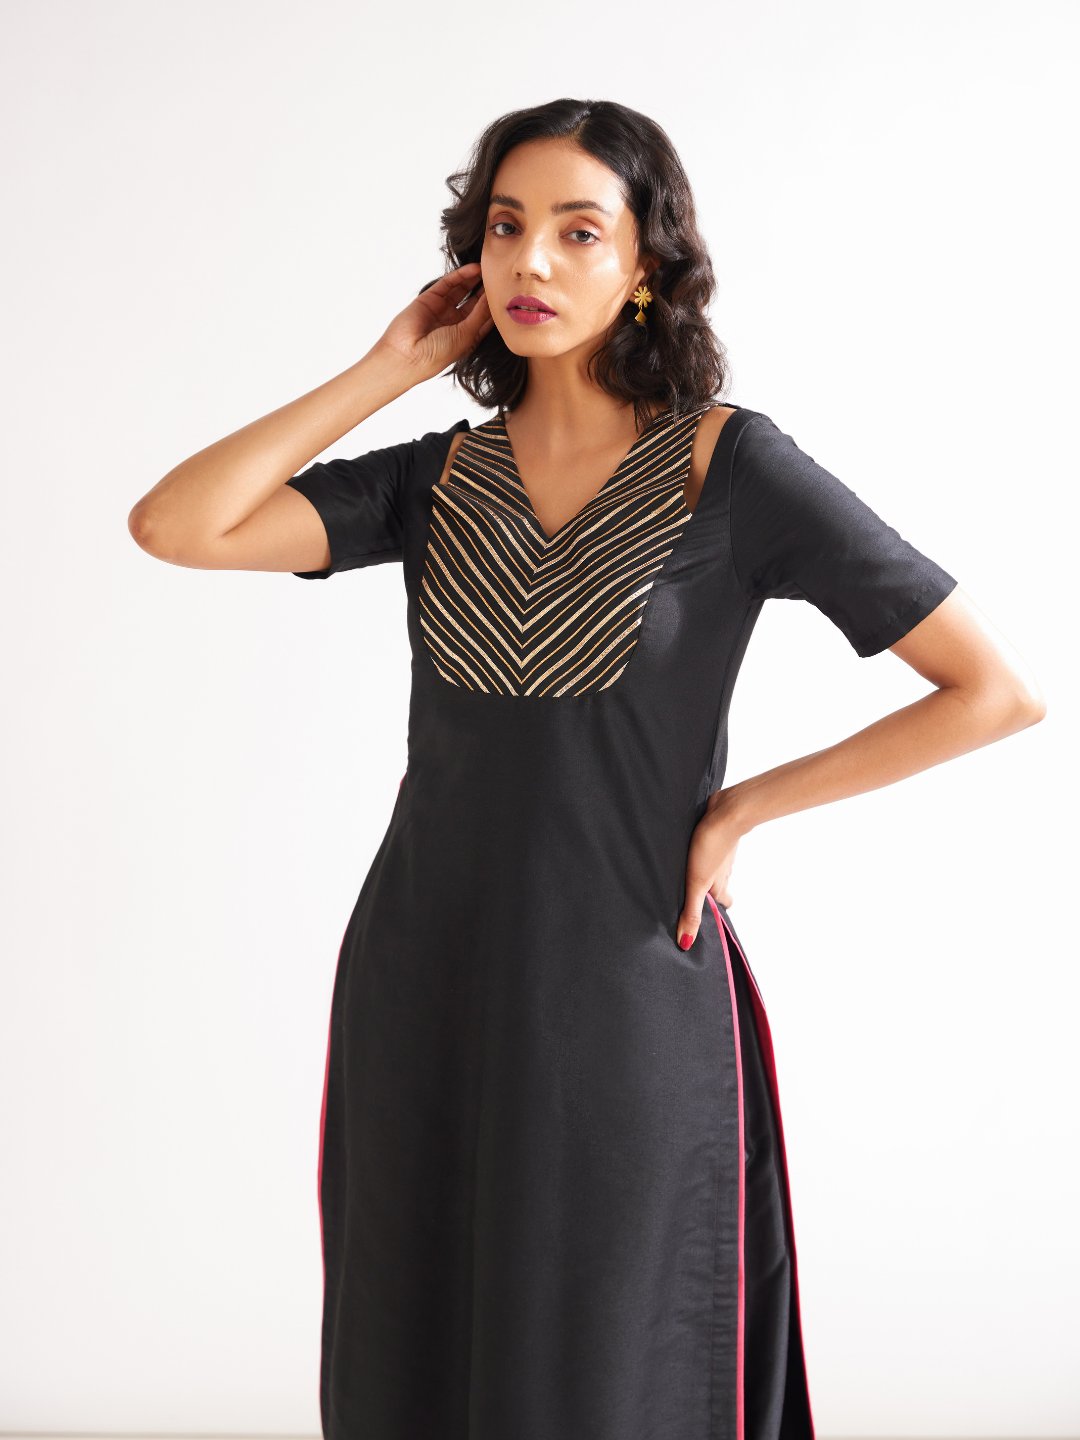 Shoulder cut-out kurta highlighted with gota patti yoke paired with side pleated pants along with dupatta- Rich black